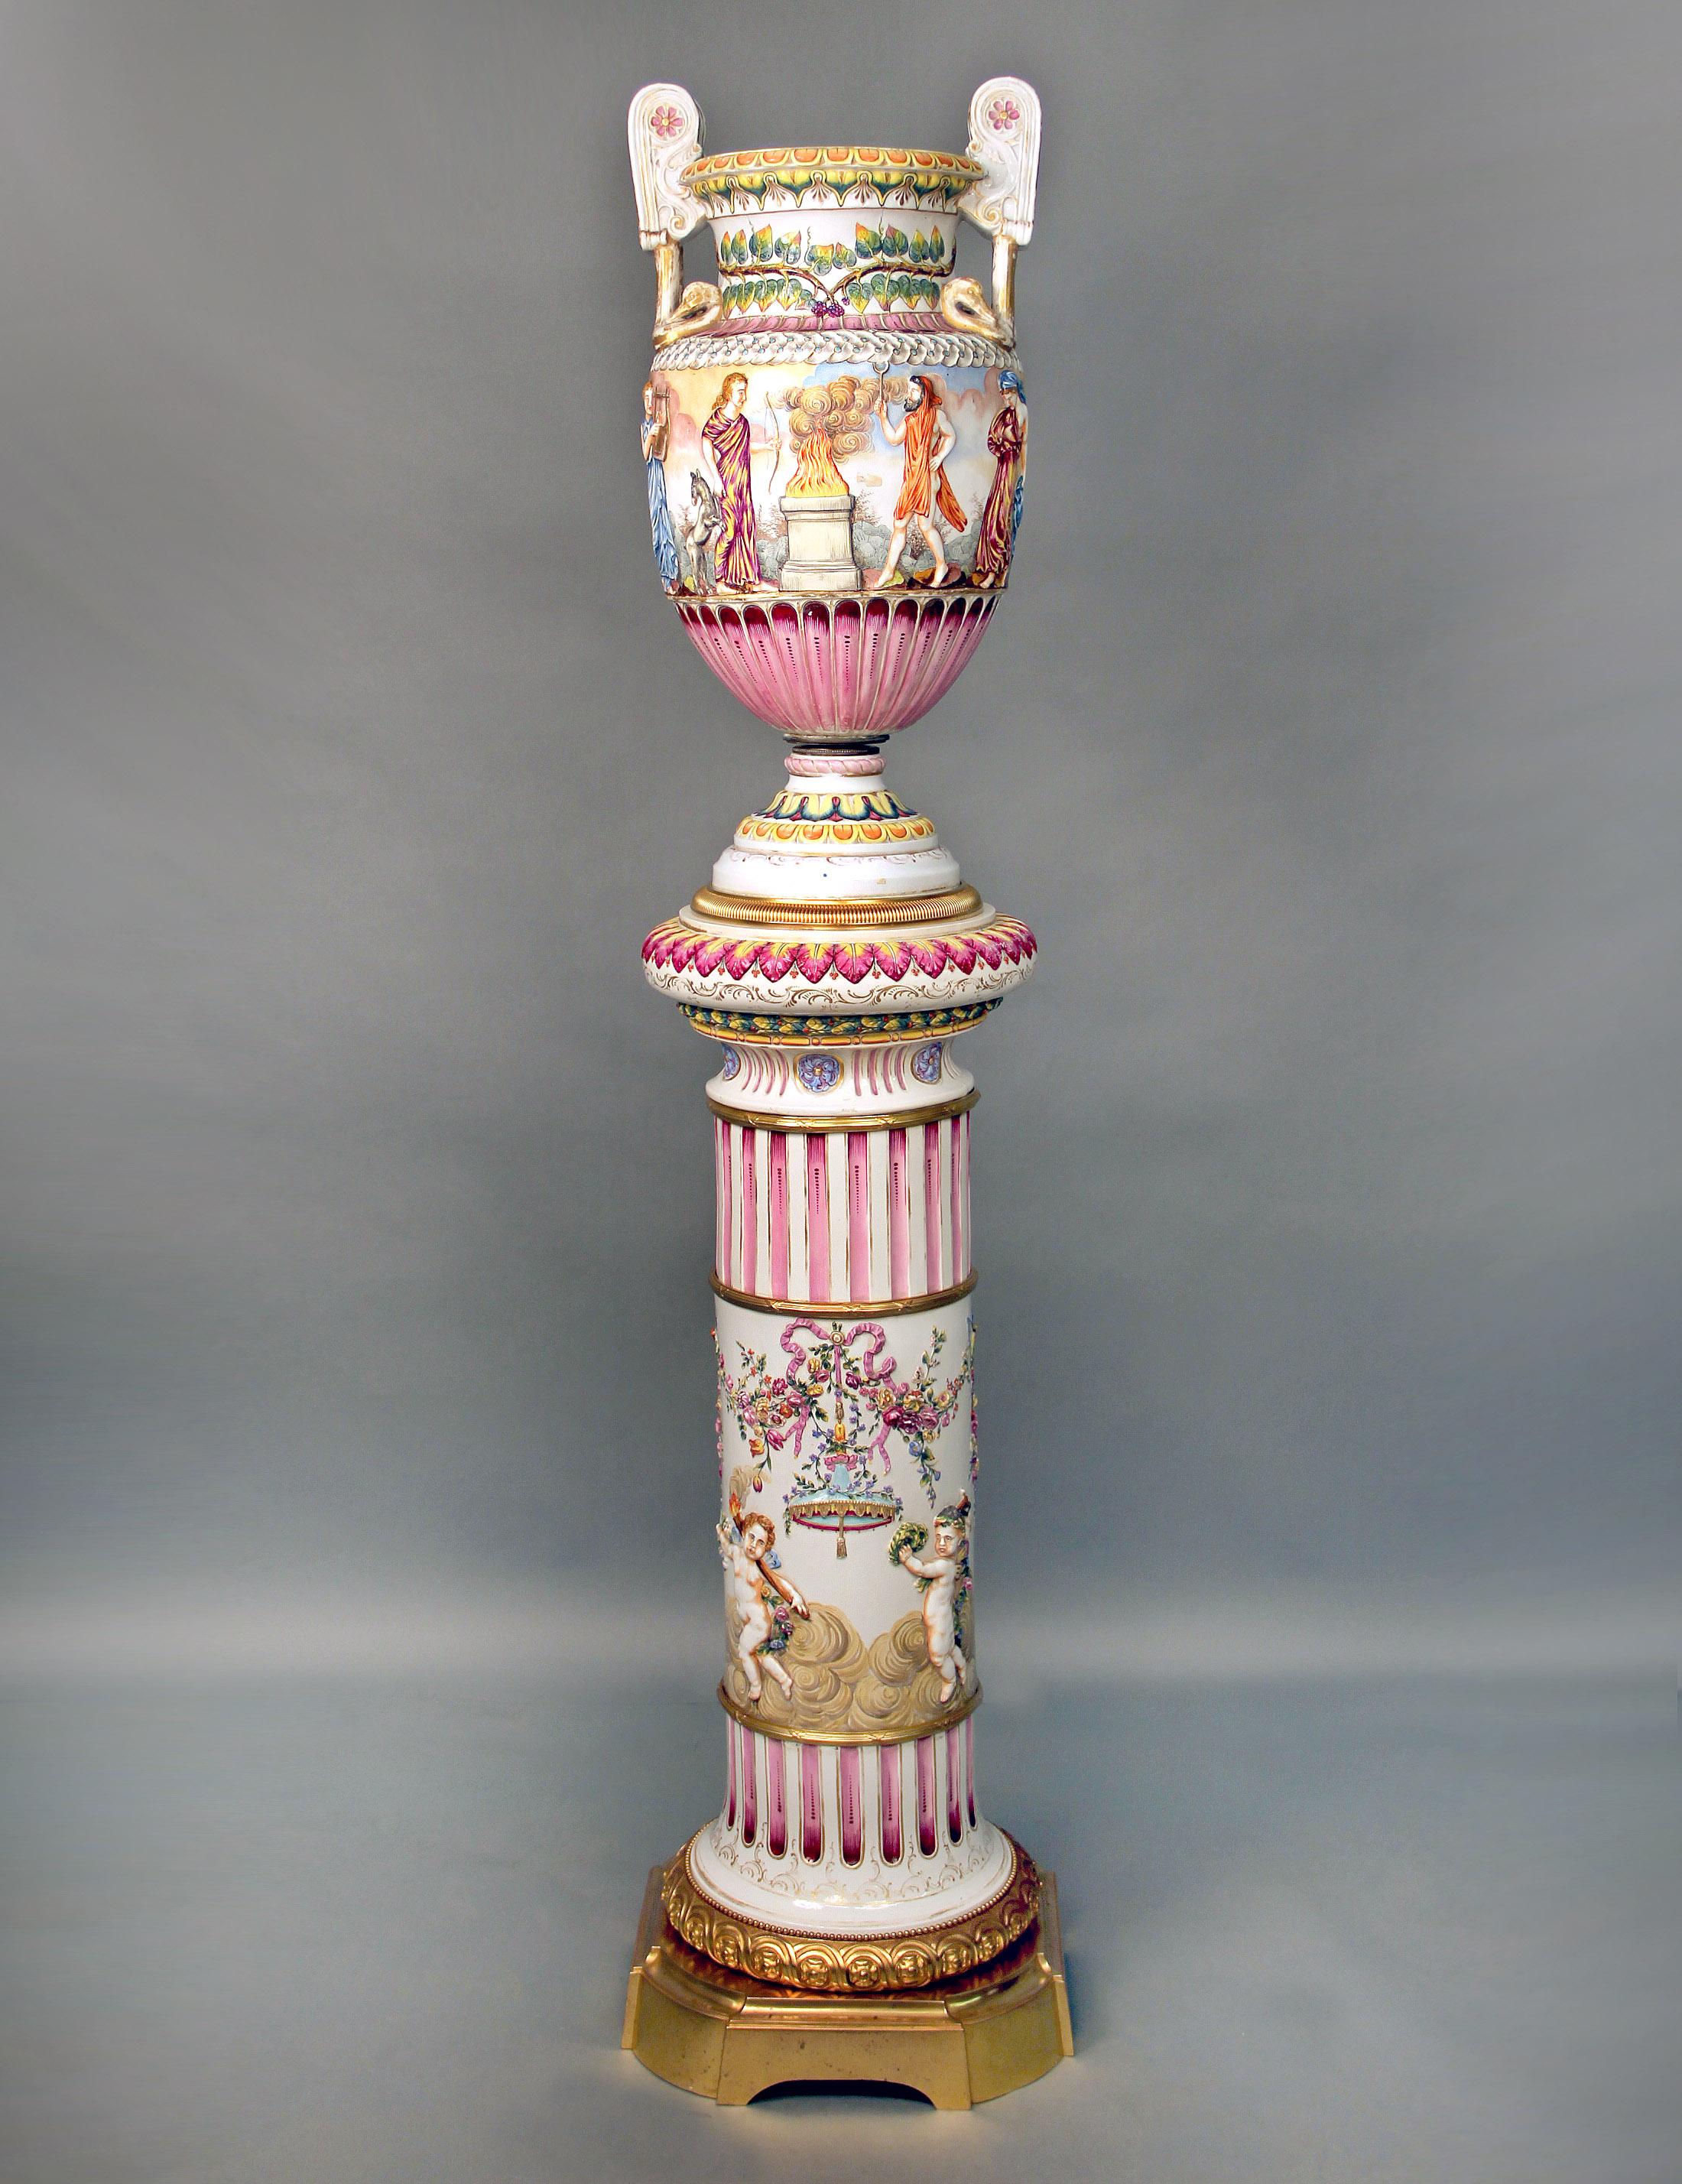 A large and interesting late 19th century gilt bronze and Italian Capodimonte porcelain vase and pedestal.

The vase with many different figures playing and holding instruments and weapons, centred around a flame, the top painted with vines,